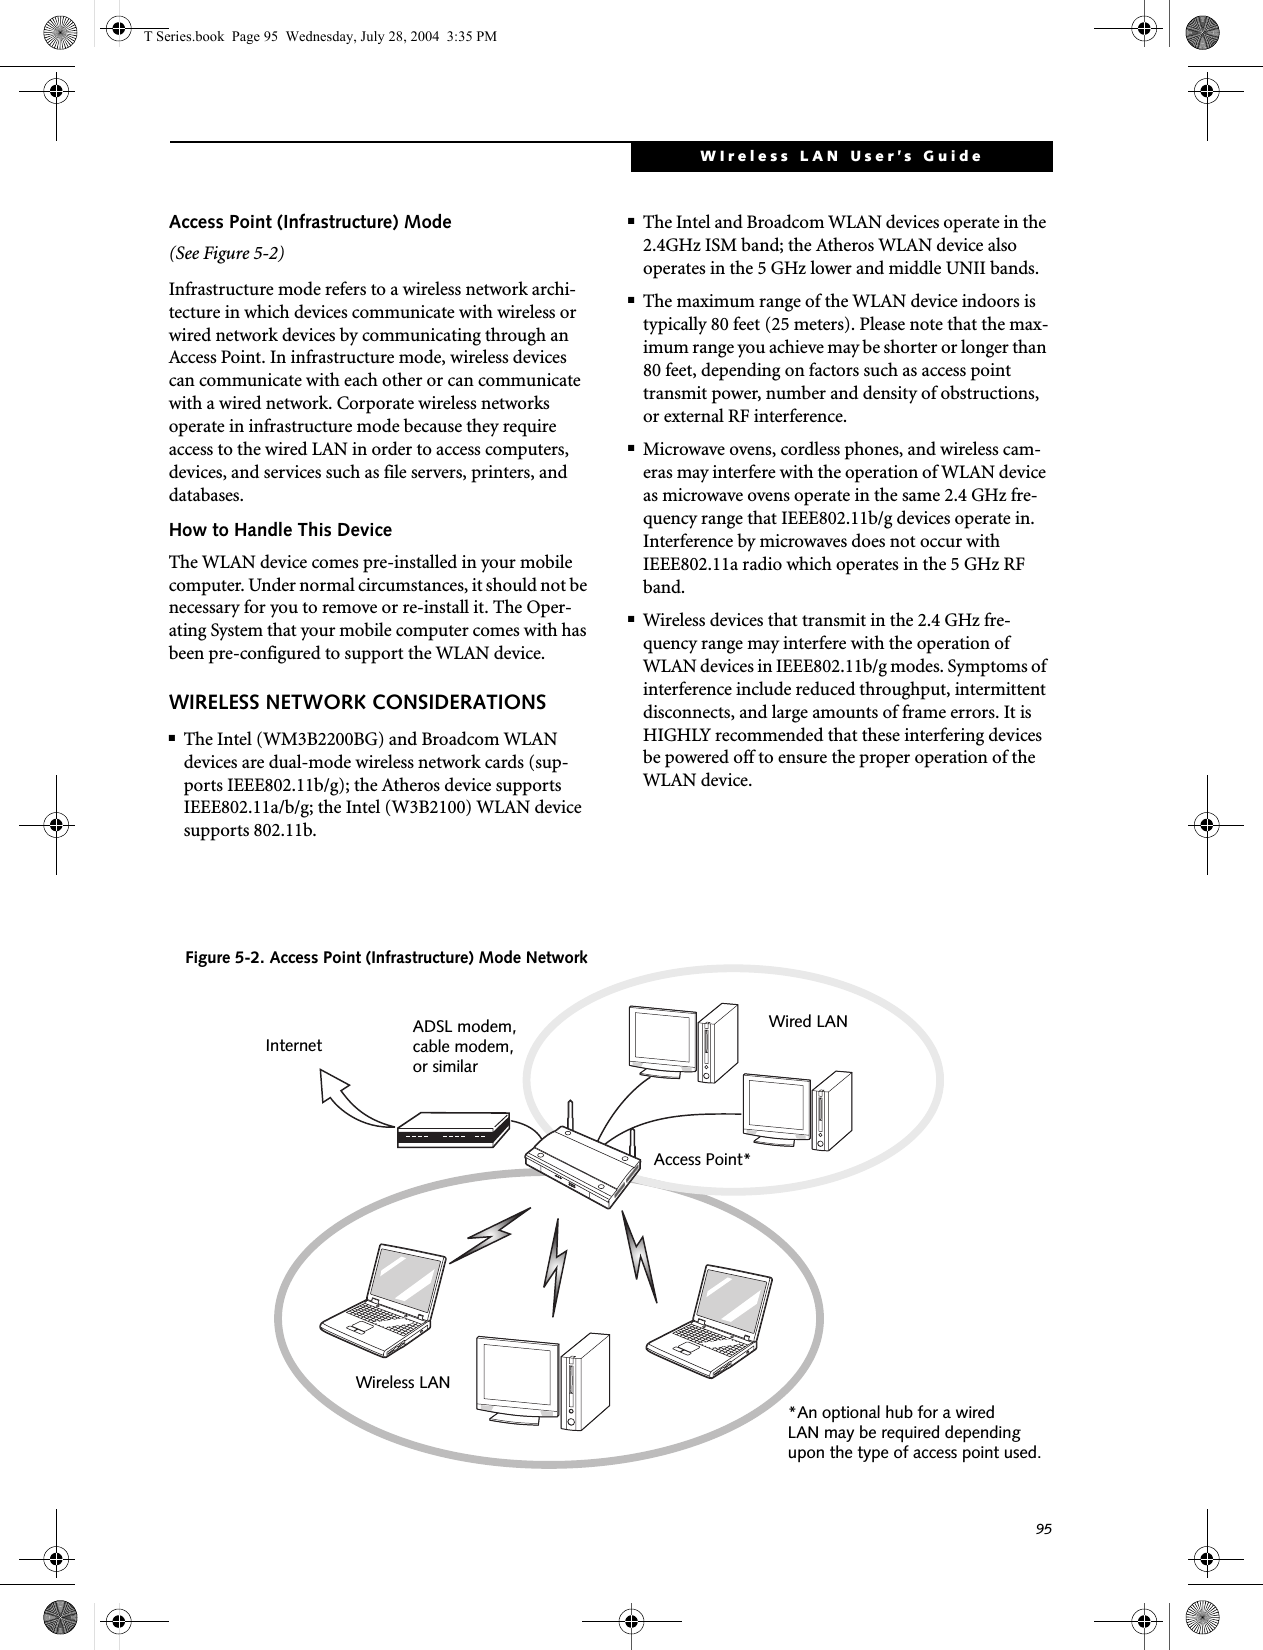 95WIreless LAN User’s Guide Access Point (Infrastructure) Mode (See Figure 5-2)Infrastructure mode refers to a wireless network archi-tecture in which devices communicate with wireless or wired network devices by communicating through an Access Point. In infrastructure mode, wireless devices can communicate with each other or can communicate with a wired network. Corporate wireless networks operate in infrastructure mode because they require access to the wired LAN in order to access computers, devices, and services such as file servers, printers, and databases.How to Handle This DeviceThe WLAN device comes pre-installed in your mobile computer. Under normal circumstances, it should not be necessary for you to remove or re-install it. The Oper-ating System that your mobile computer comes with has been pre-configured to support the WLAN device. WIRELESS NETWORK CONSIDERATIONS■The Intel (WM3B2200BG) and Broadcom WLAN devices are dual-mode wireless network cards (sup-ports IEEE802.11b/g); the Atheros device supports IEEE802.11a/b/g; the Intel (W3B2100) WLAN device supports 802.11b.■The Intel and Broadcom WLAN devices operate in the 2.4GHz ISM band; the Atheros WLAN device also operates in the 5 GHz lower and middle UNII bands.■The maximum range of the WLAN device indoors is typically 80 feet (25 meters). Please note that the max-imum range you achieve may be shorter or longer than 80 feet, depending on factors such as access point transmit power, number and density of obstructions, or external RF interference.■Microwave ovens, cordless phones, and wireless cam-eras may interfere with the operation of WLAN device as microwave ovens operate in the same 2.4 GHz fre-quency range that IEEE802.11b/g devices operate in. Interference by microwaves does not occur with IEEE802.11a radio which operates in the 5 GHz RF band.■Wireless devices that transmit in the 2.4 GHz fre-quency range may interfere with the operation of WLAN devices in IEEE802.11b/g modes. Symptoms of interference include reduced throughput, intermittent disconnects, and large amounts of frame errors. It is HIGHLY recommended that these interfering devices be powered off to ensure the proper operation of the WLAN device.Figure 5-2. Access Point (Infrastructure) Mode NetworkADSL modem,cable modem,or similarInternetWired LANAccess Point*Wireless LAN*An optional hub for a wiredLAN may be required dependingupon the type of access point used.T Series.book  Page 95  Wednesday, July 28, 2004  3:35 PM